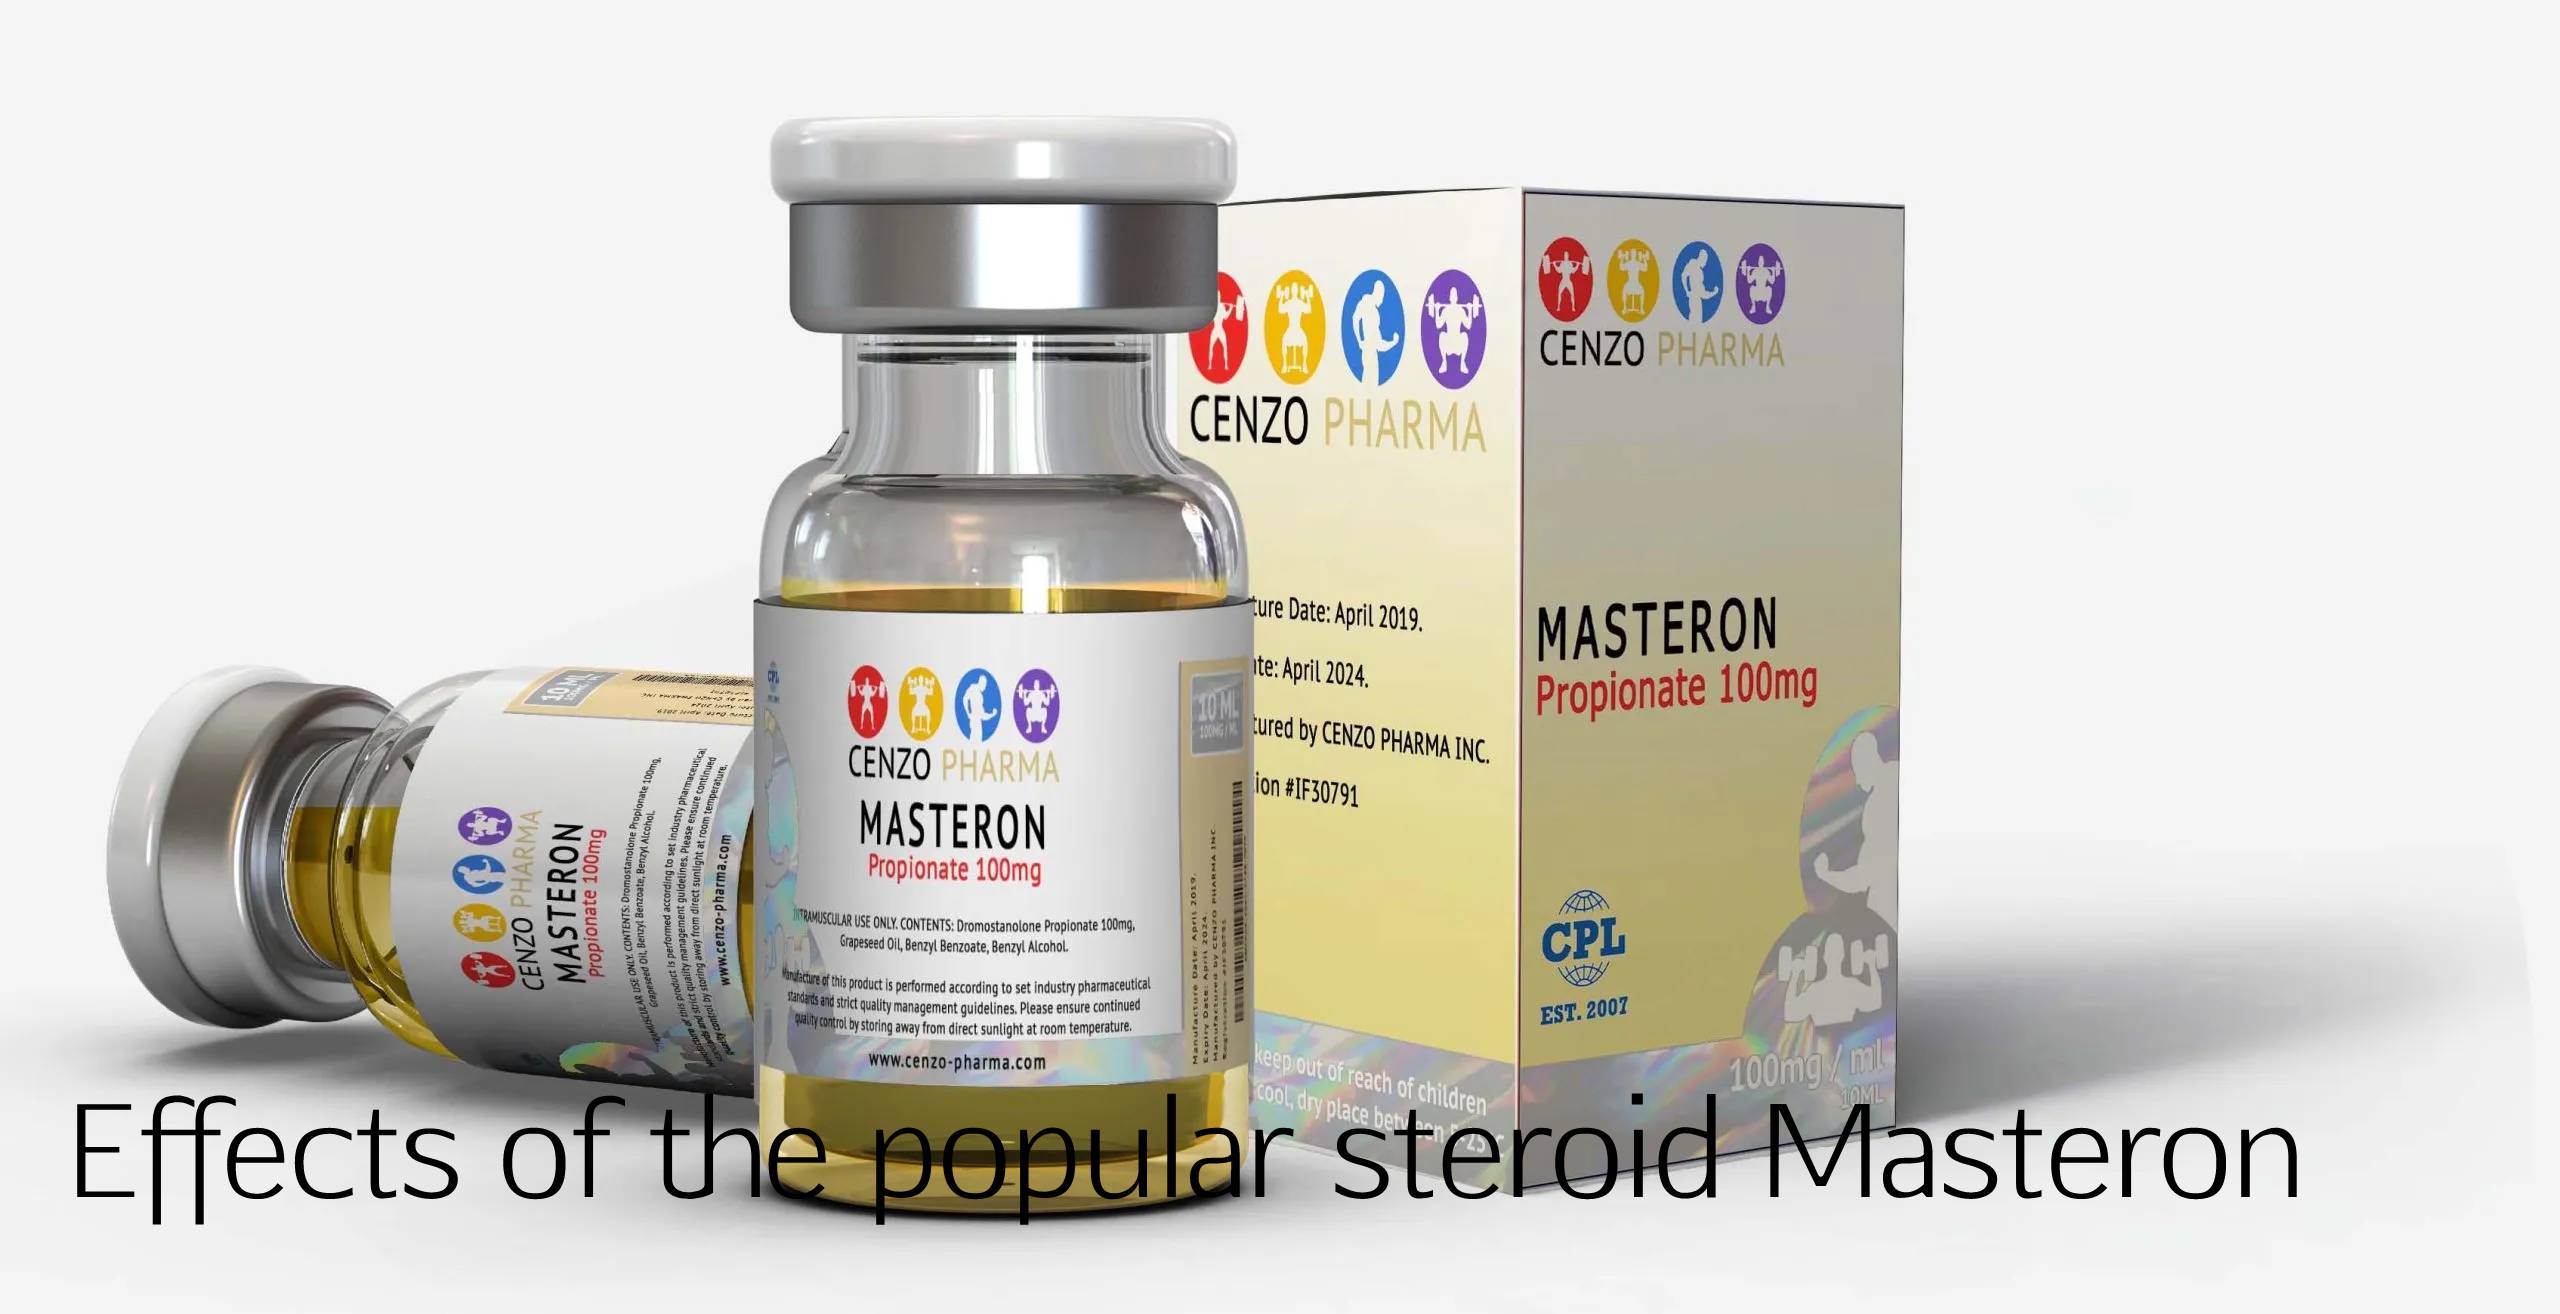 Effects of the popular steroid Masteron